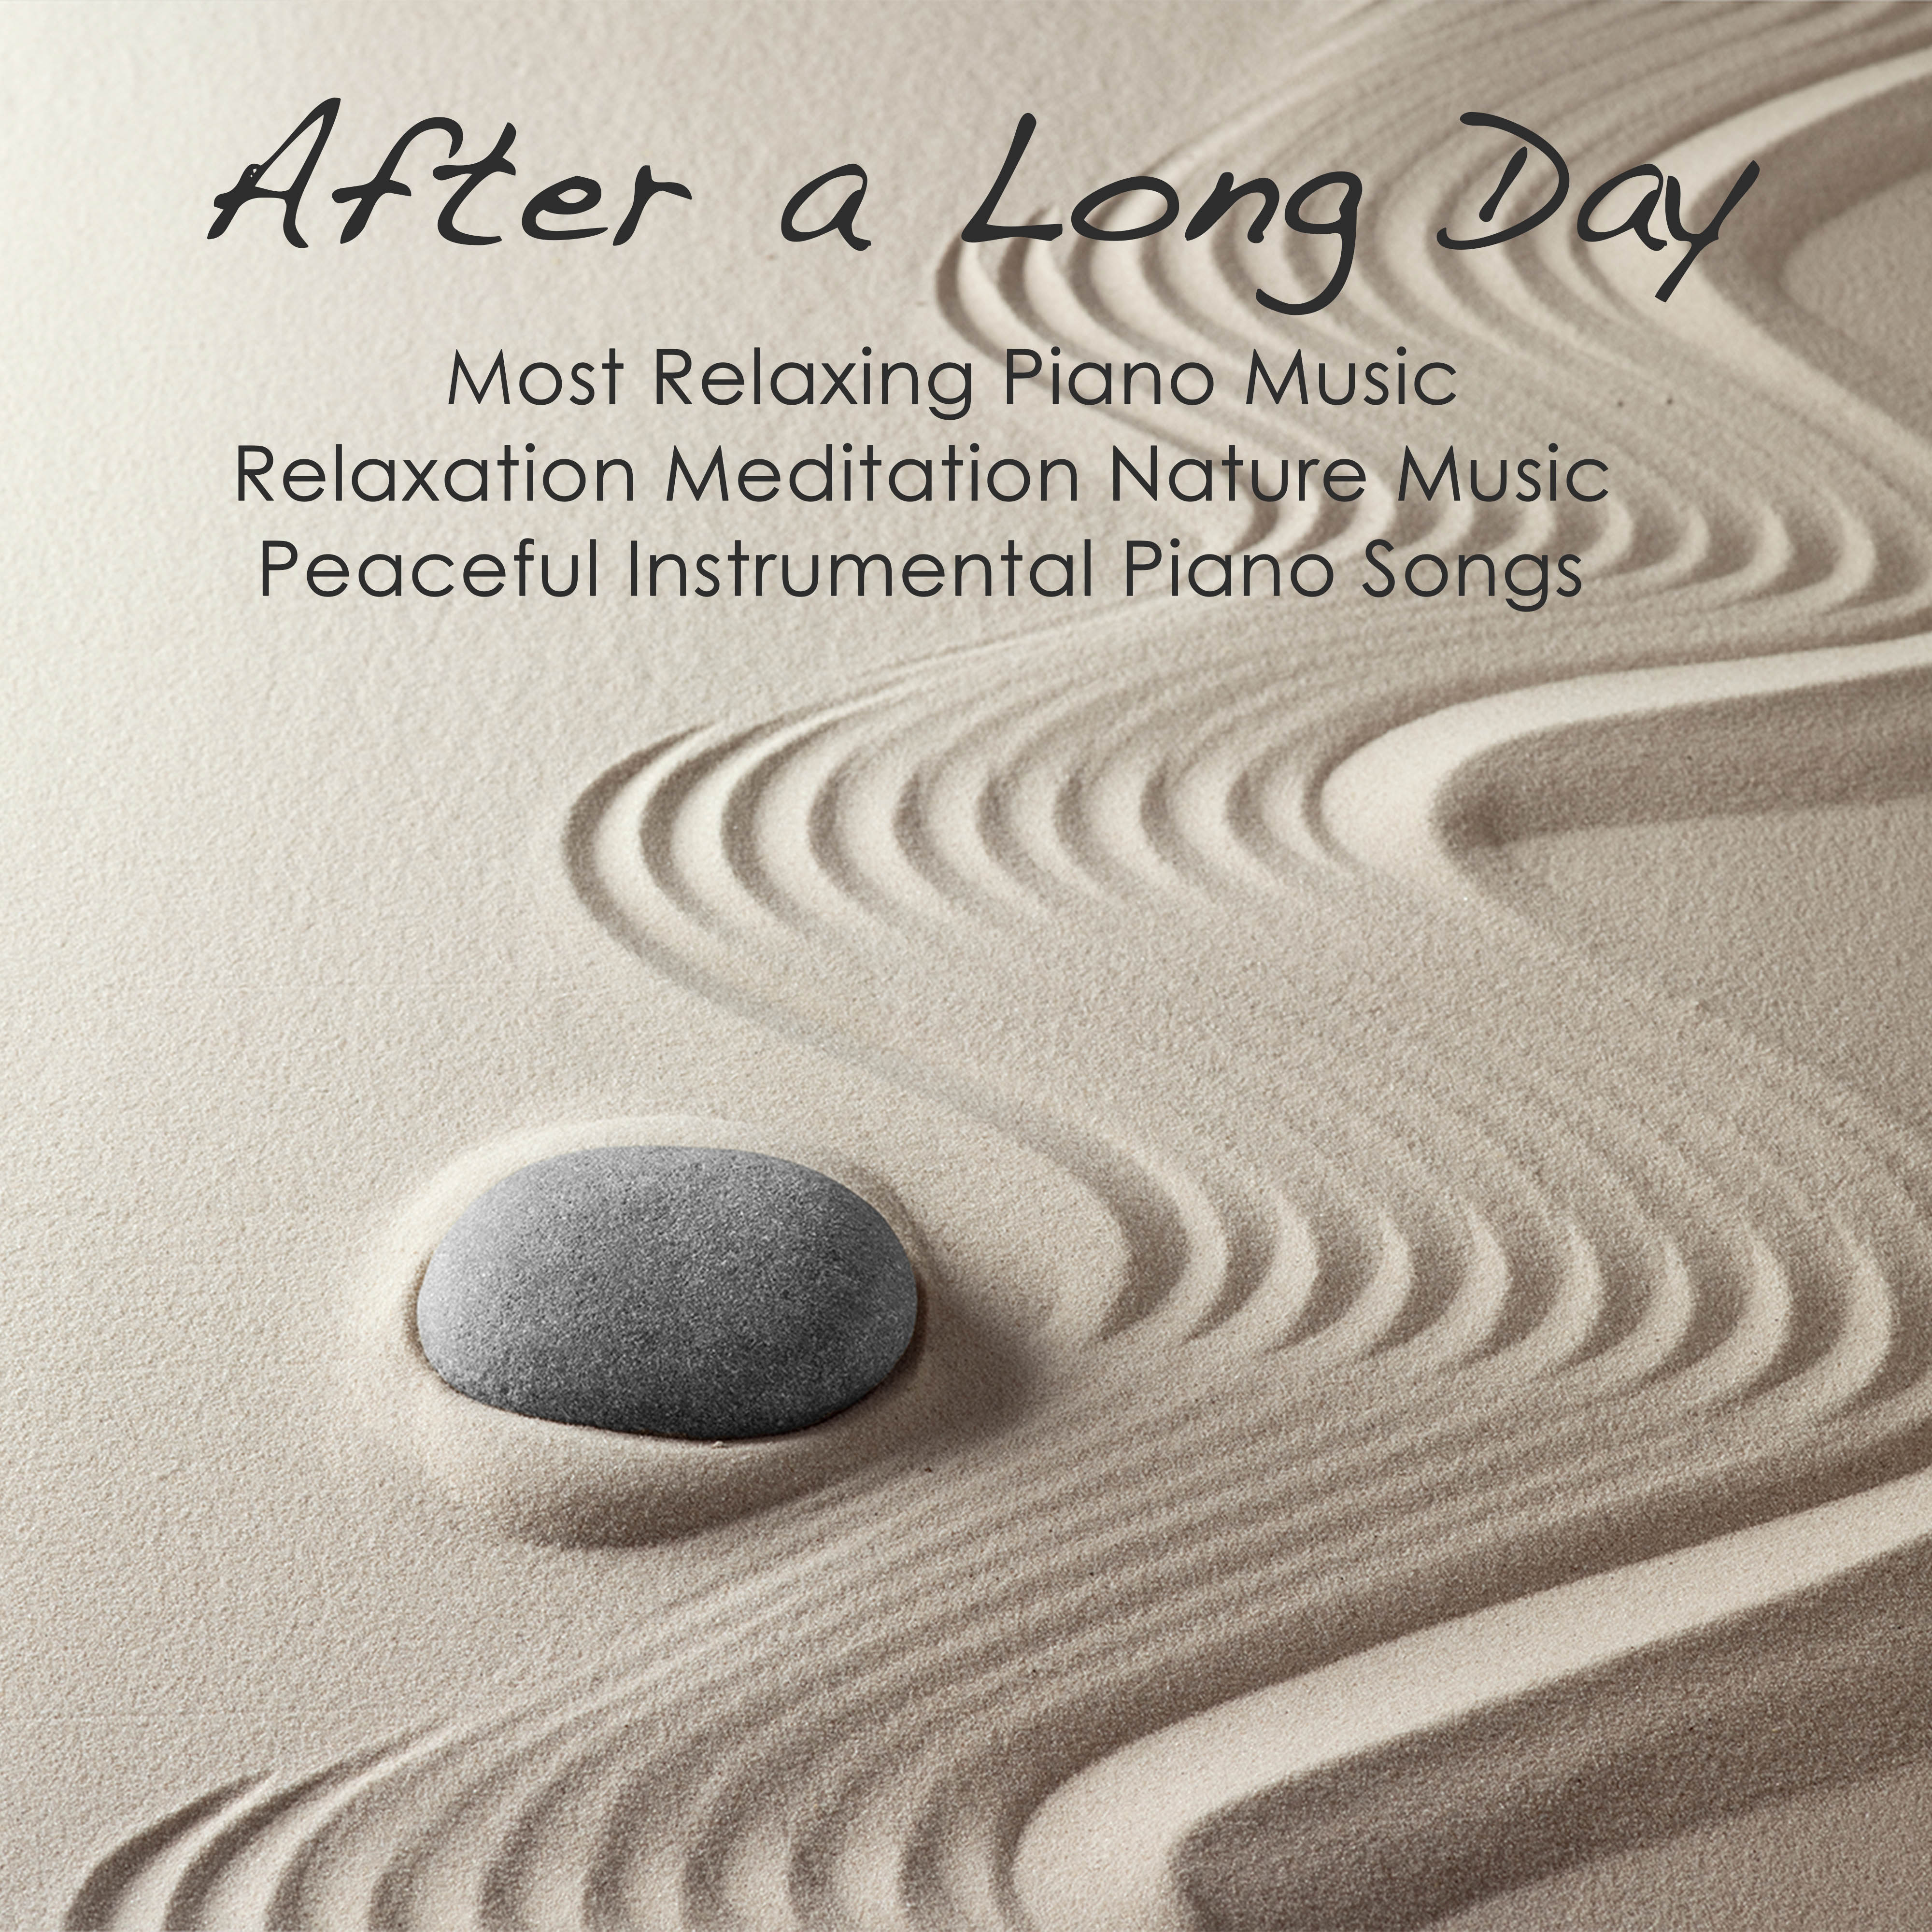 Stress Free With Instrumental Piano Music